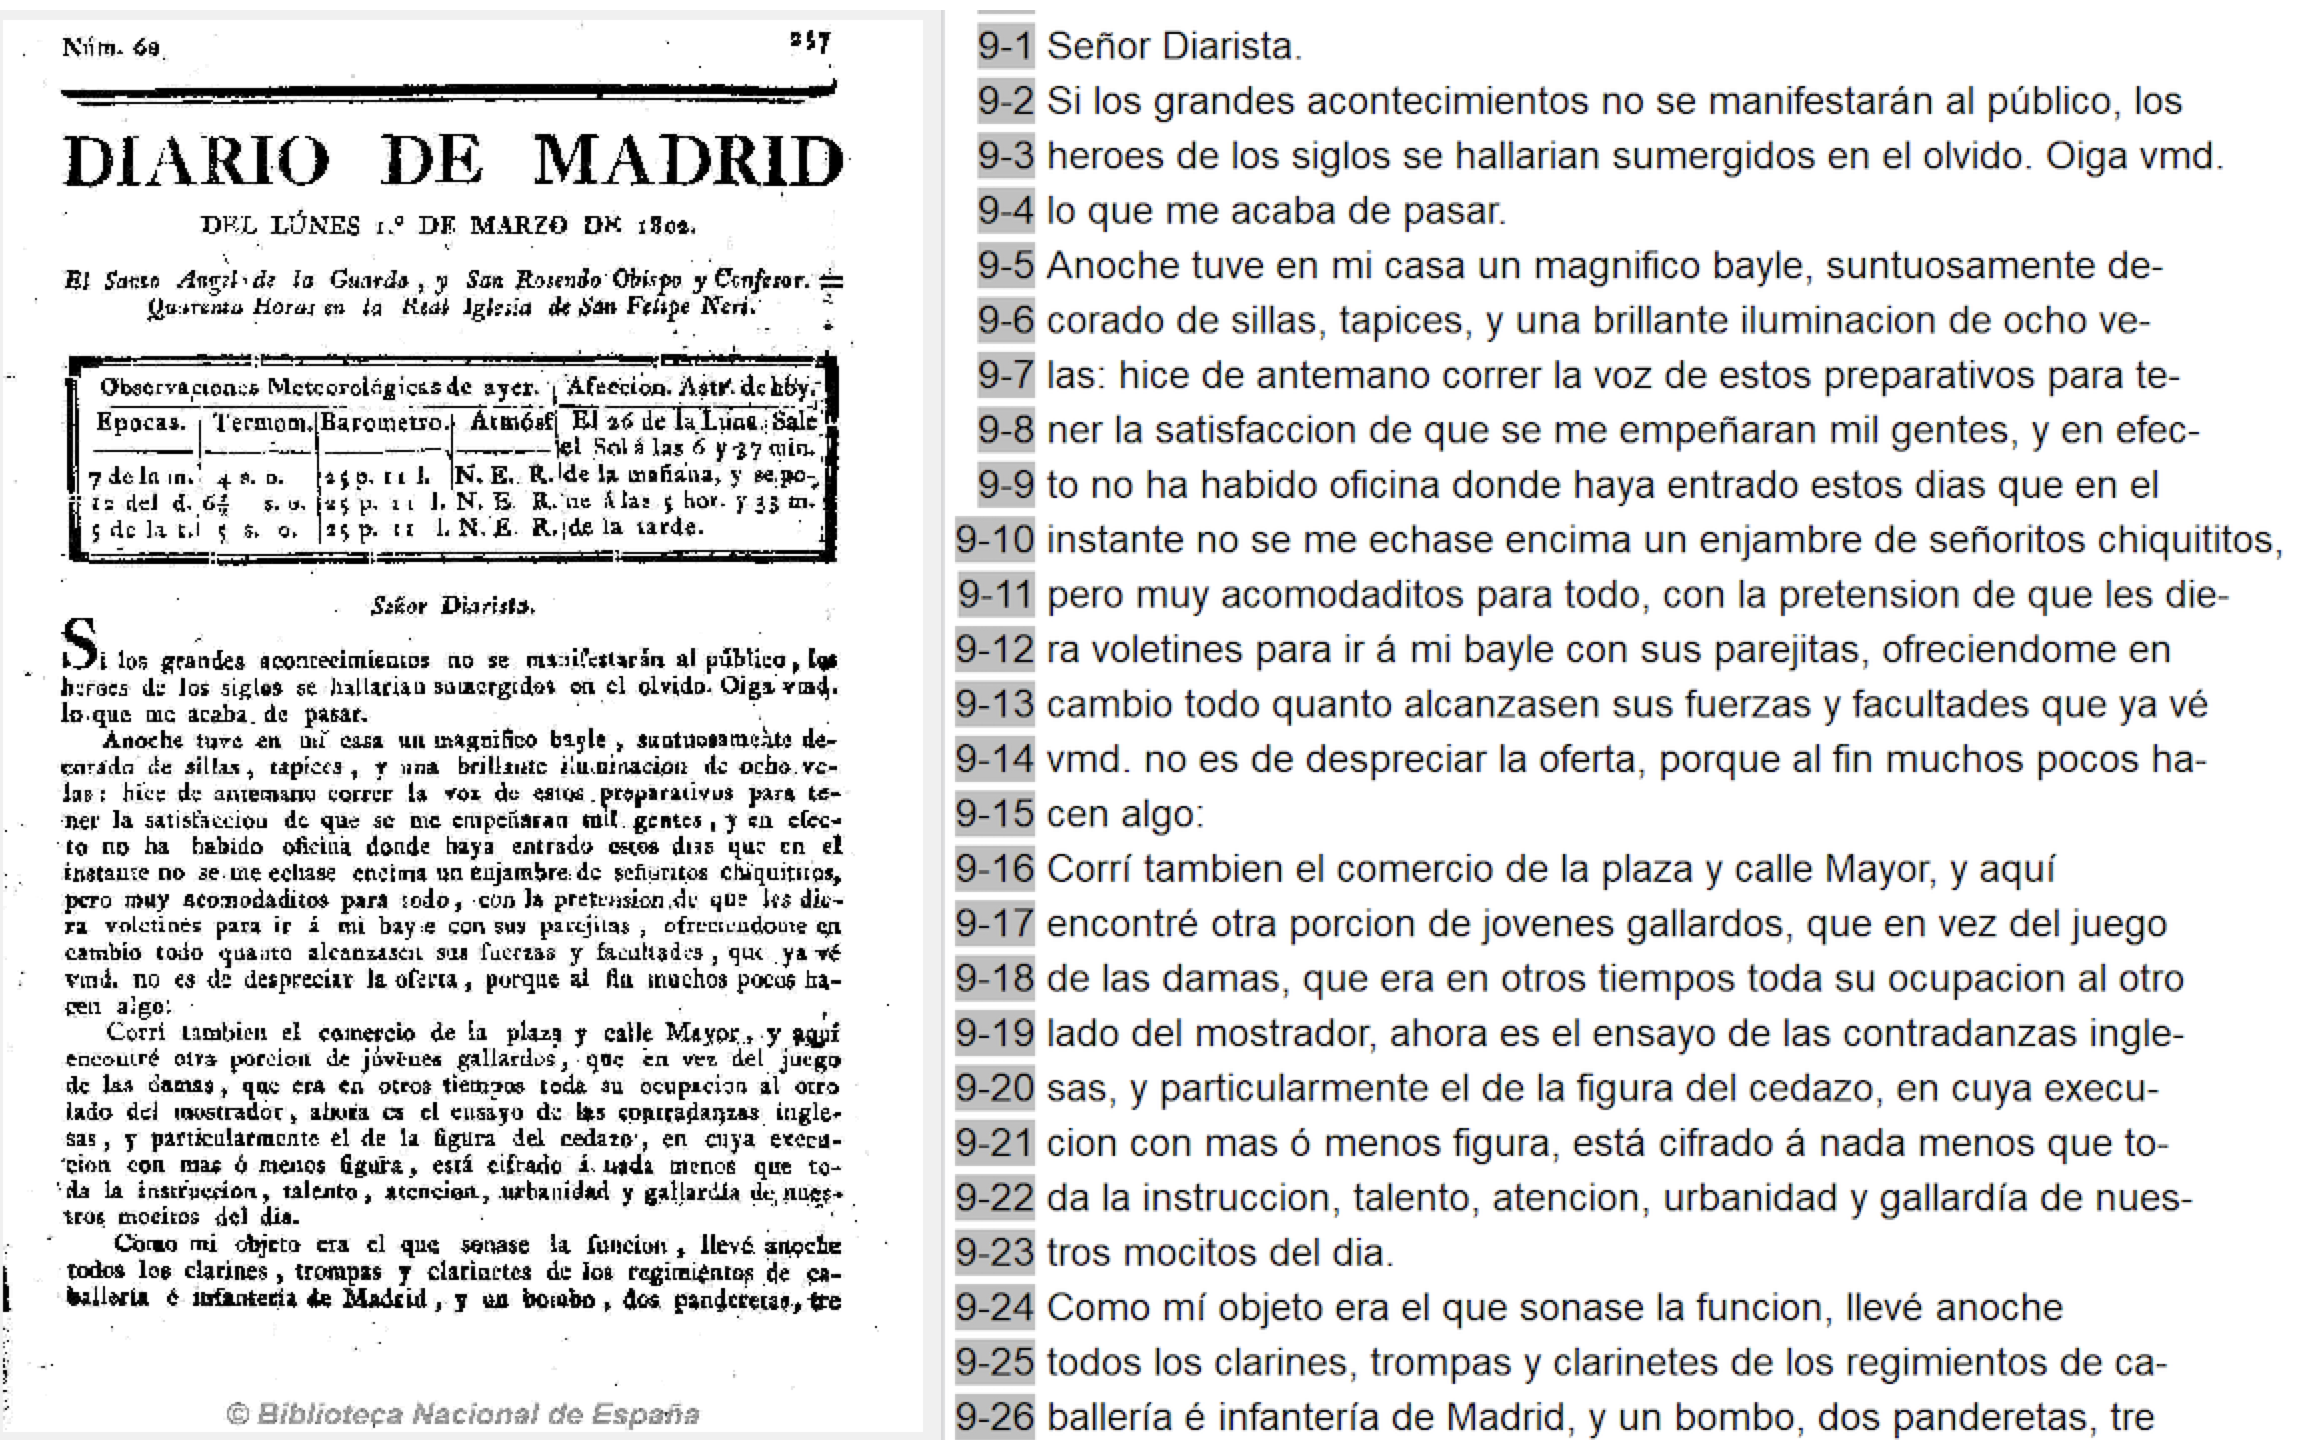 Scan of printed book page juxtaposed with is own line-by-line numbered
                     transcription.